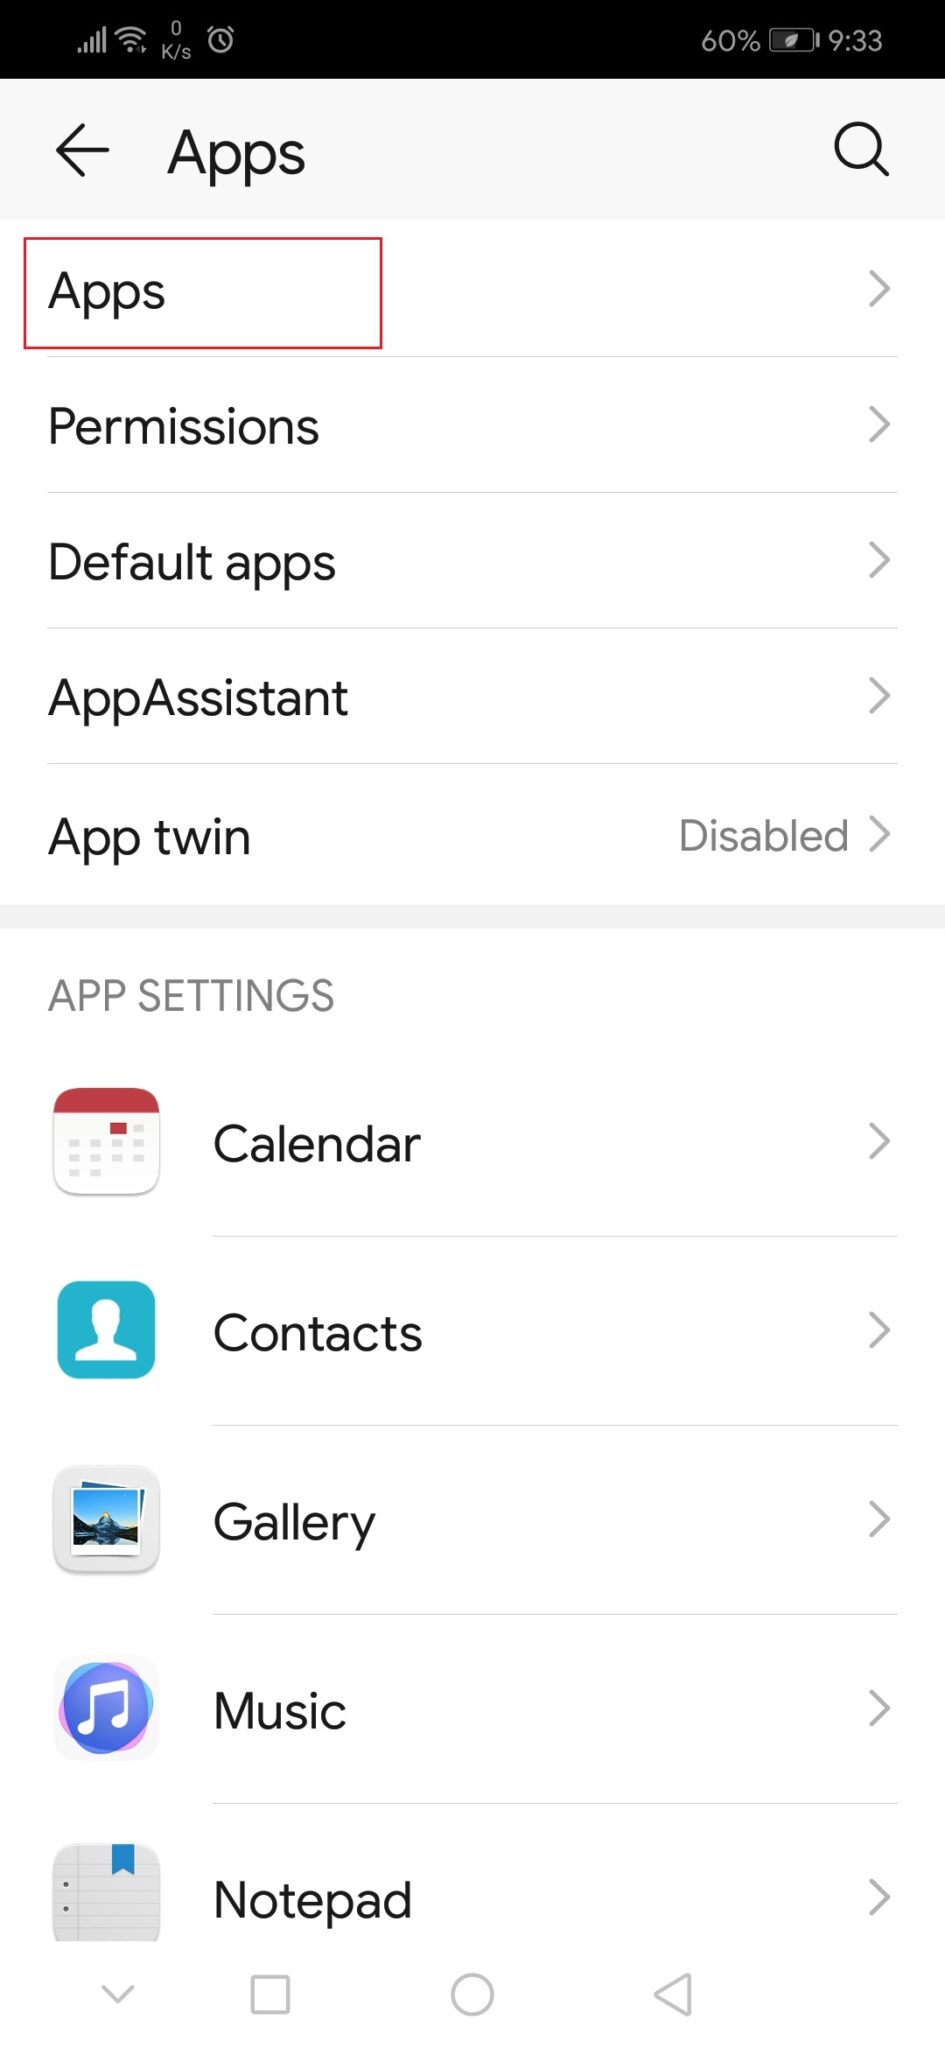 tap on Apps to open list of All application in apps settings